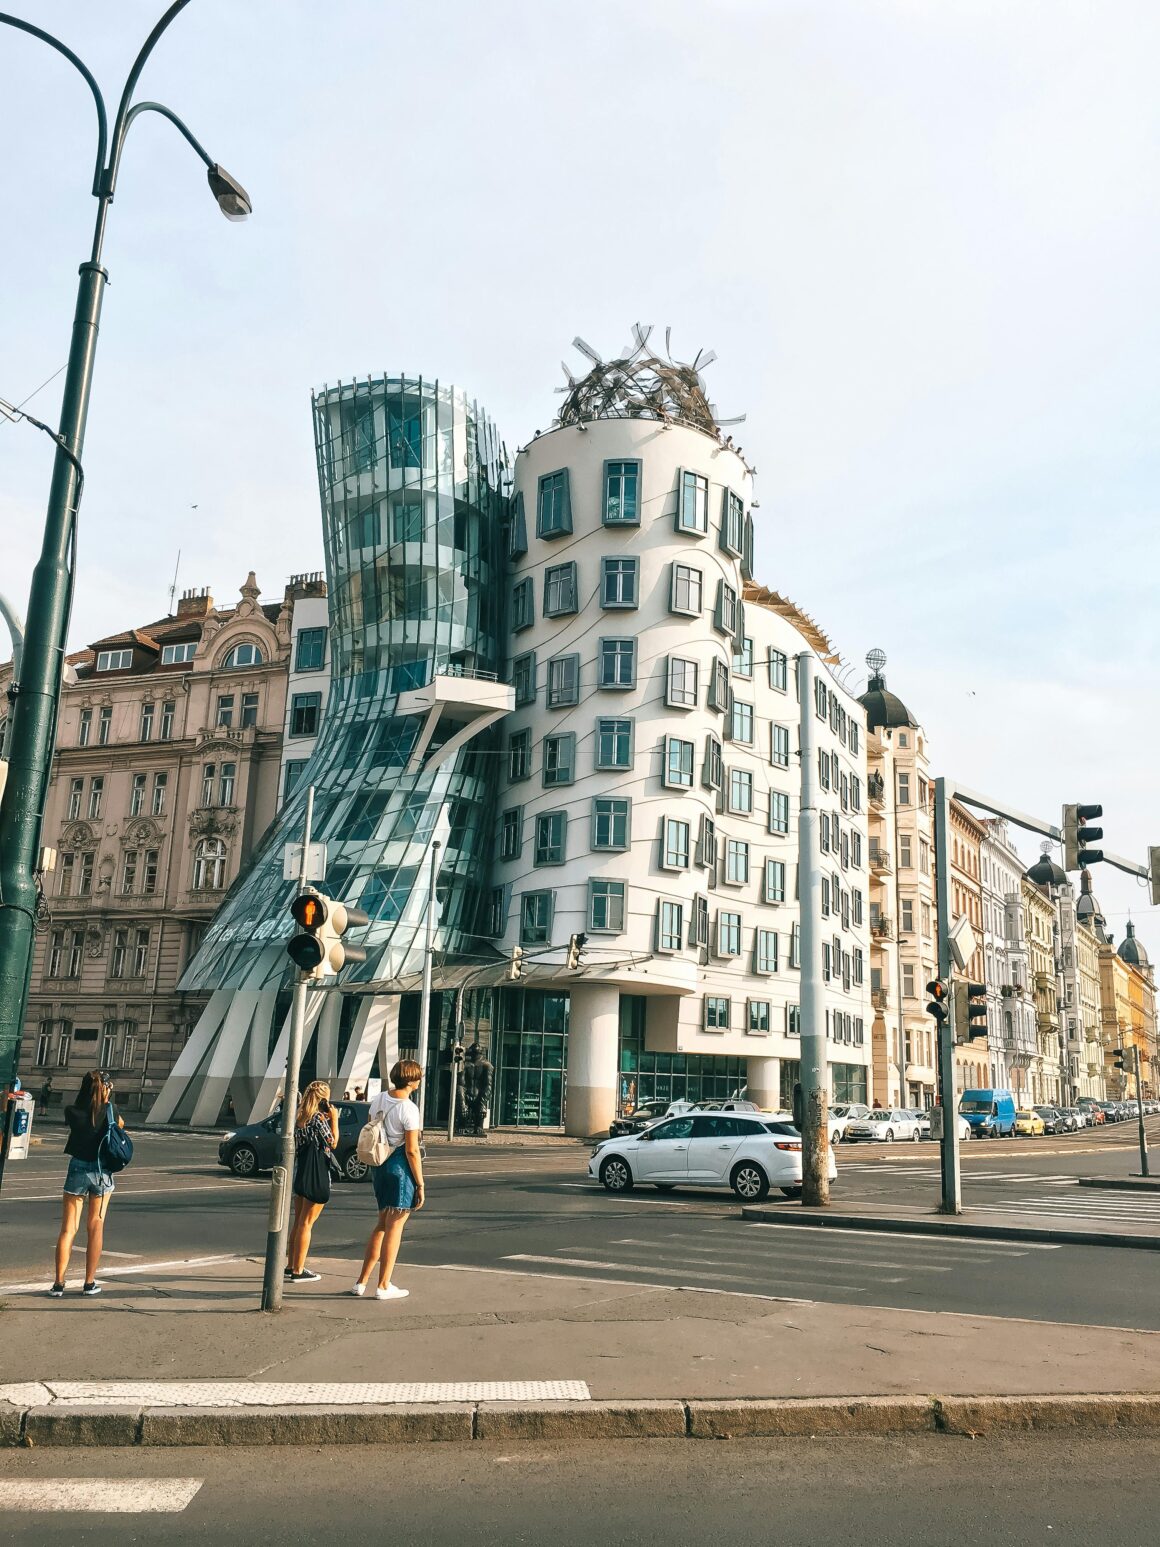 Dancing house, one of the best free things to do in Prague